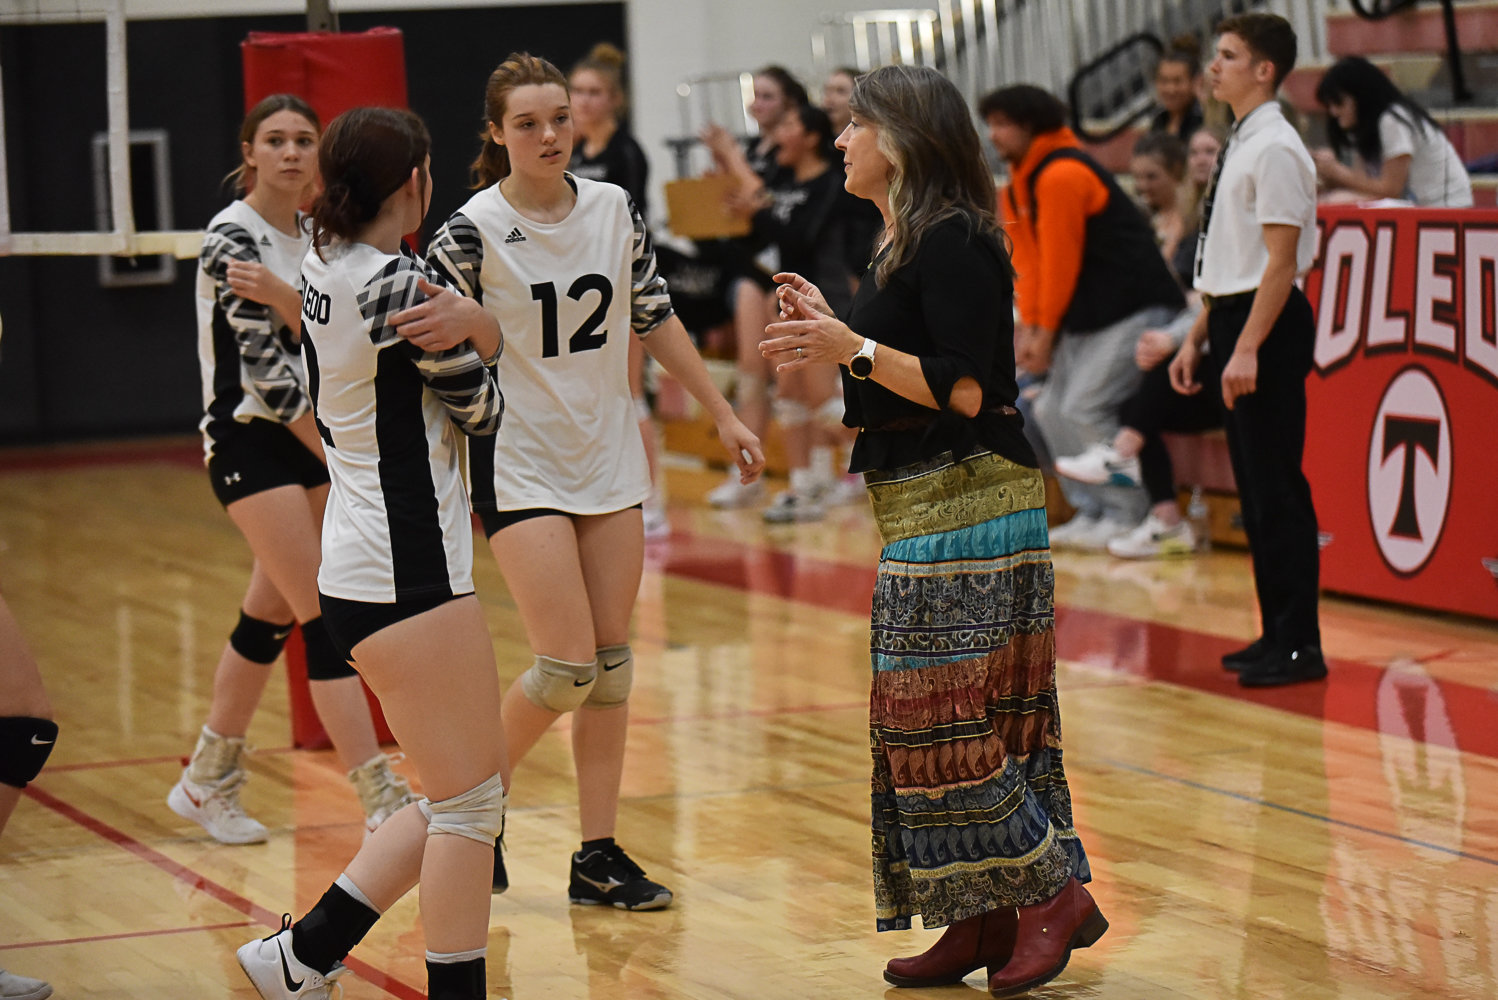 Toledo coach Kelli Larson talks to her team after callng a timeout during the Riverhawks' match against Napavine on Oct. 24.